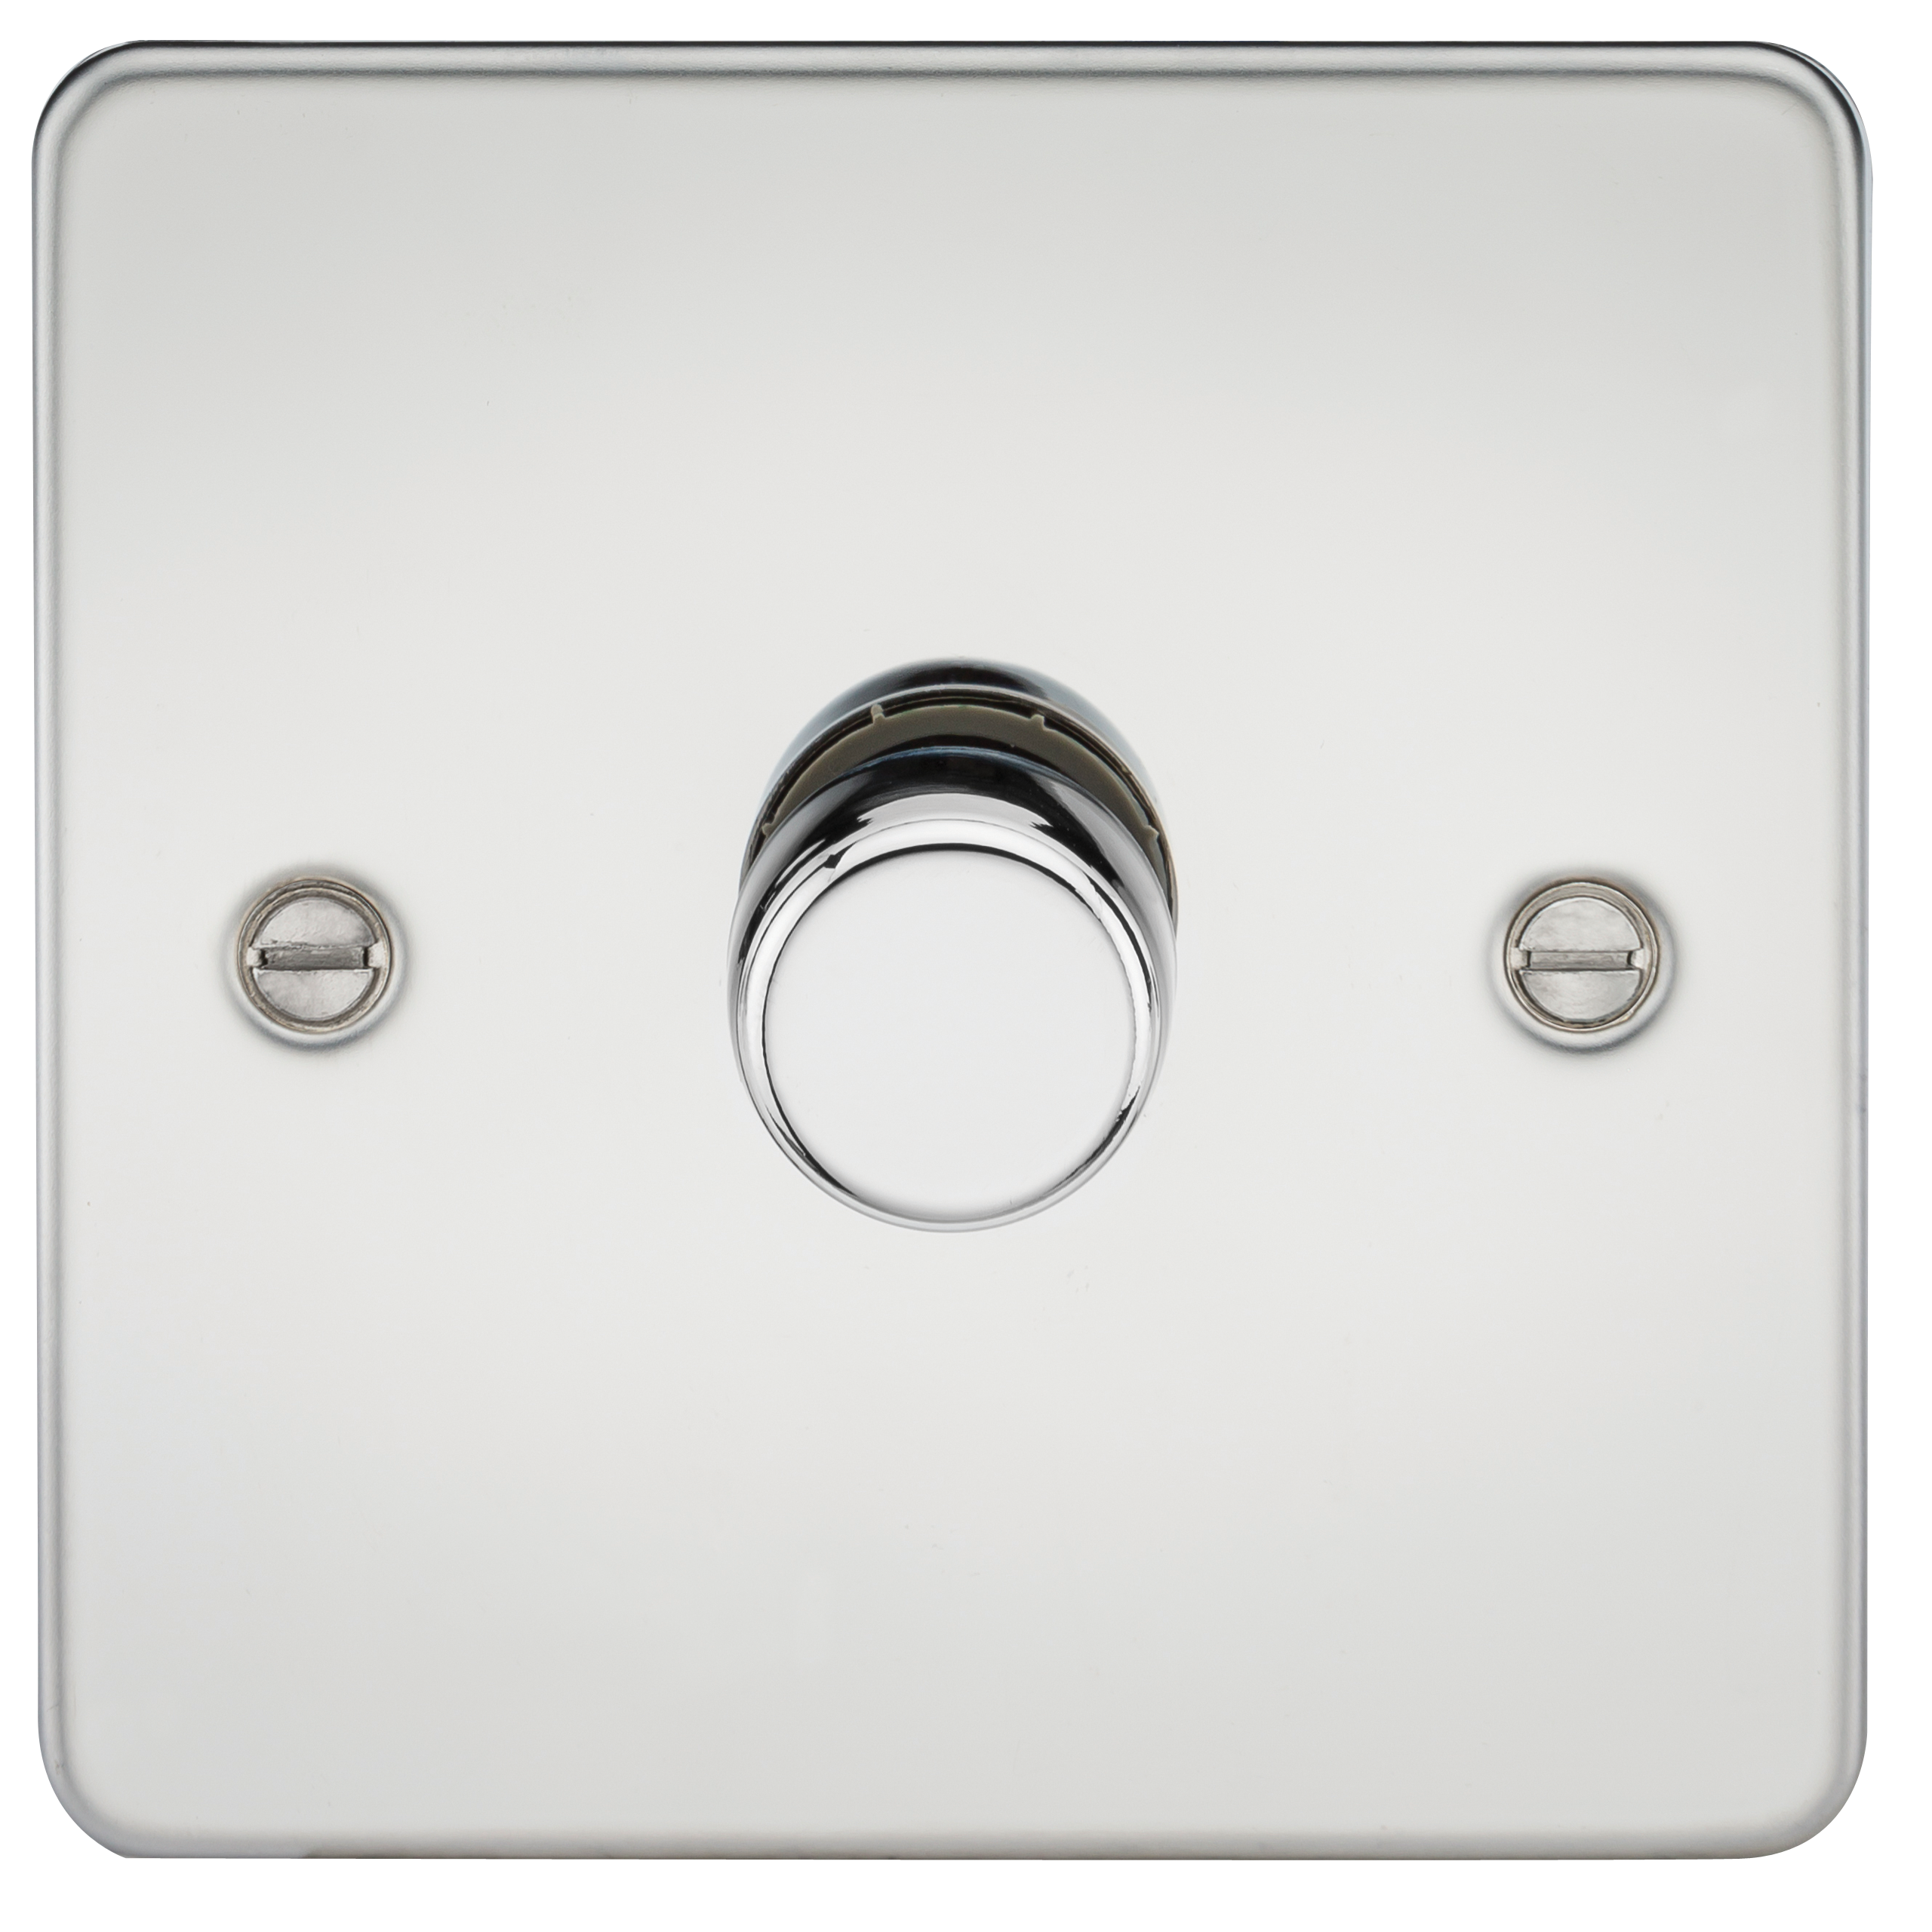 Flat Plate 1G 2 Way 10-200W Dimmer - Polished Chrome - FP2181PC 